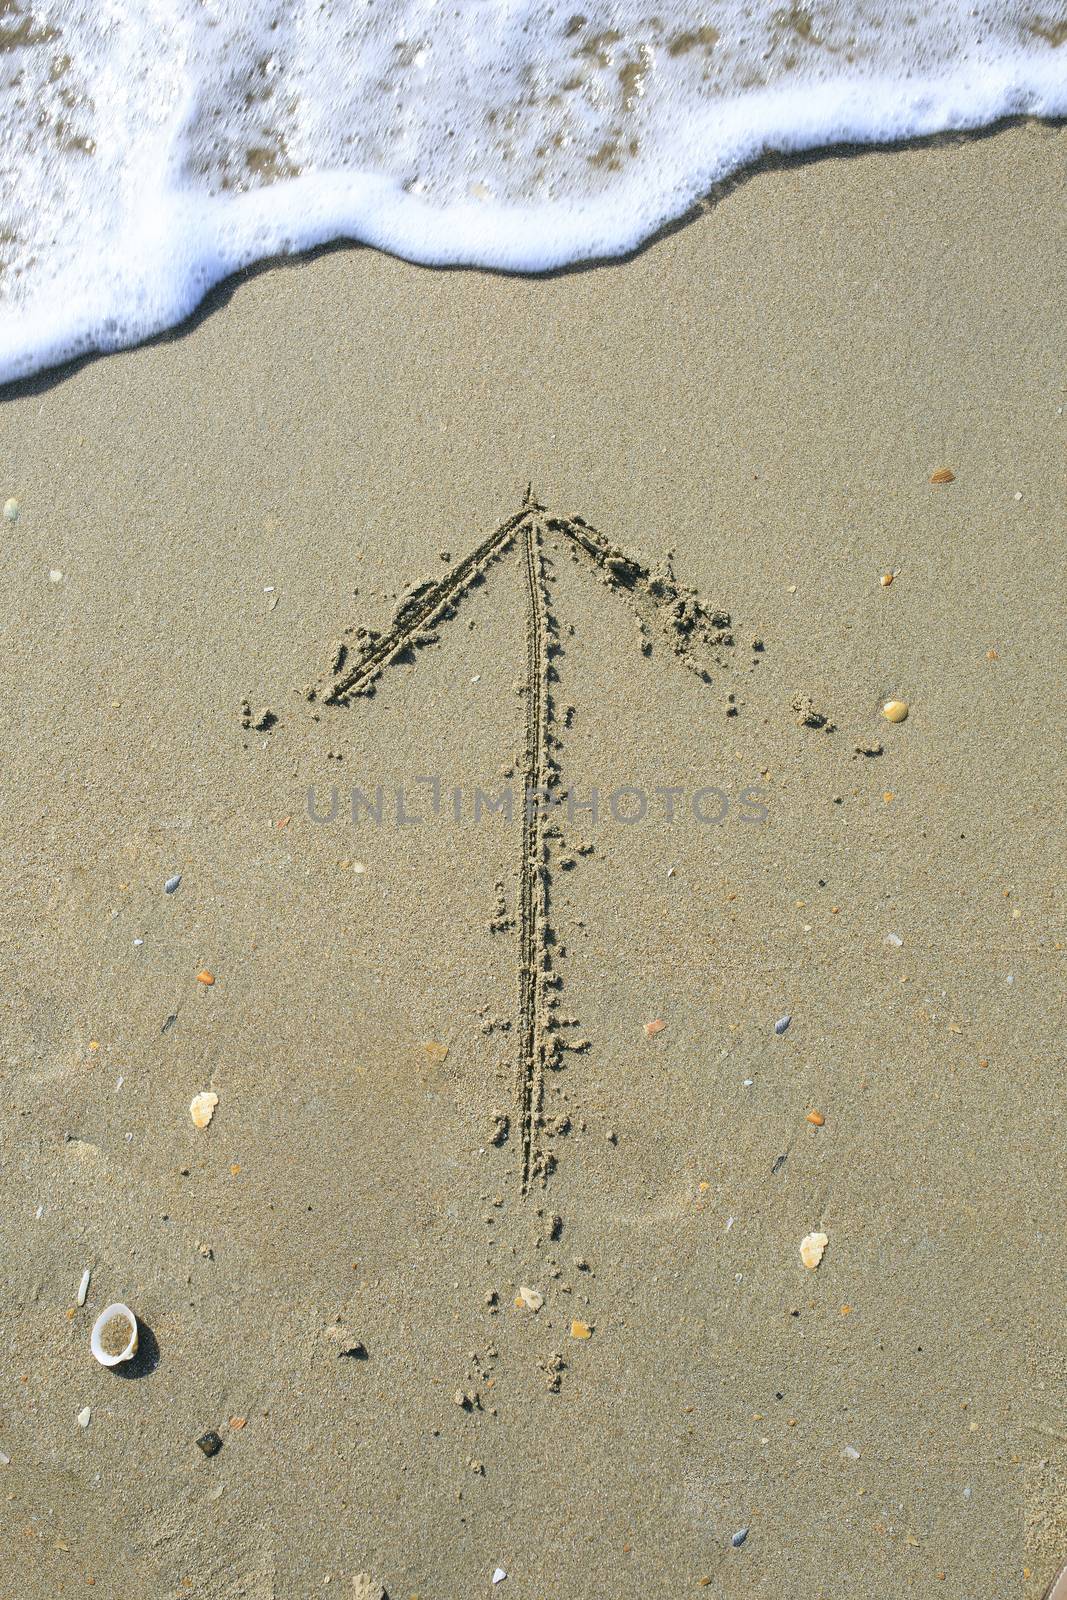 Letter drawn on the sand beach by nachrc2001